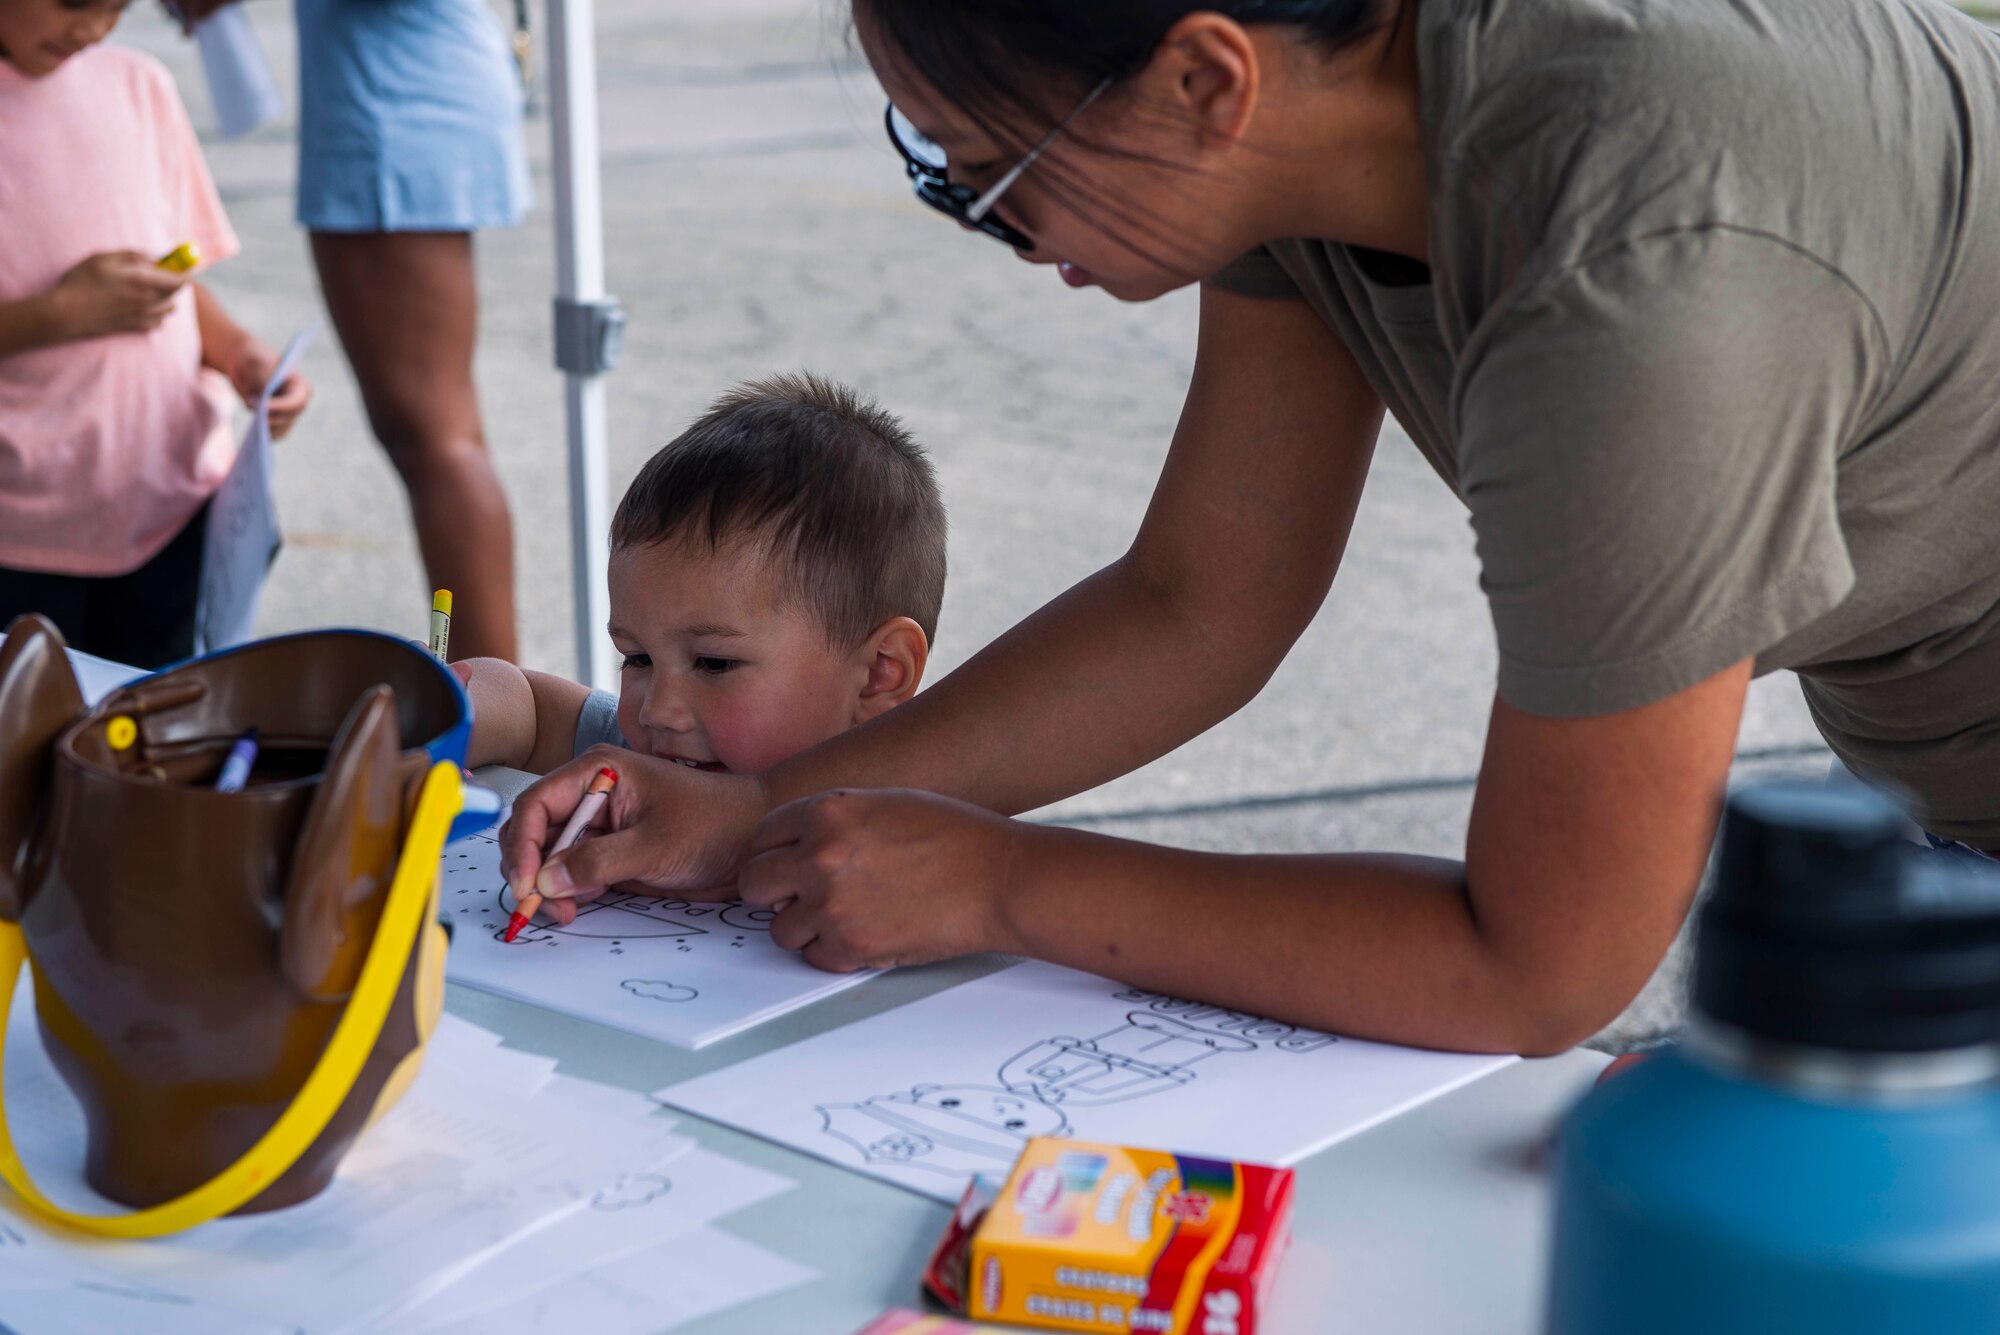 A young child with his head barely over the plastic table, colors a coloring sheet next to his mom on the right who is wearing sunglasses and an ocp shirt.